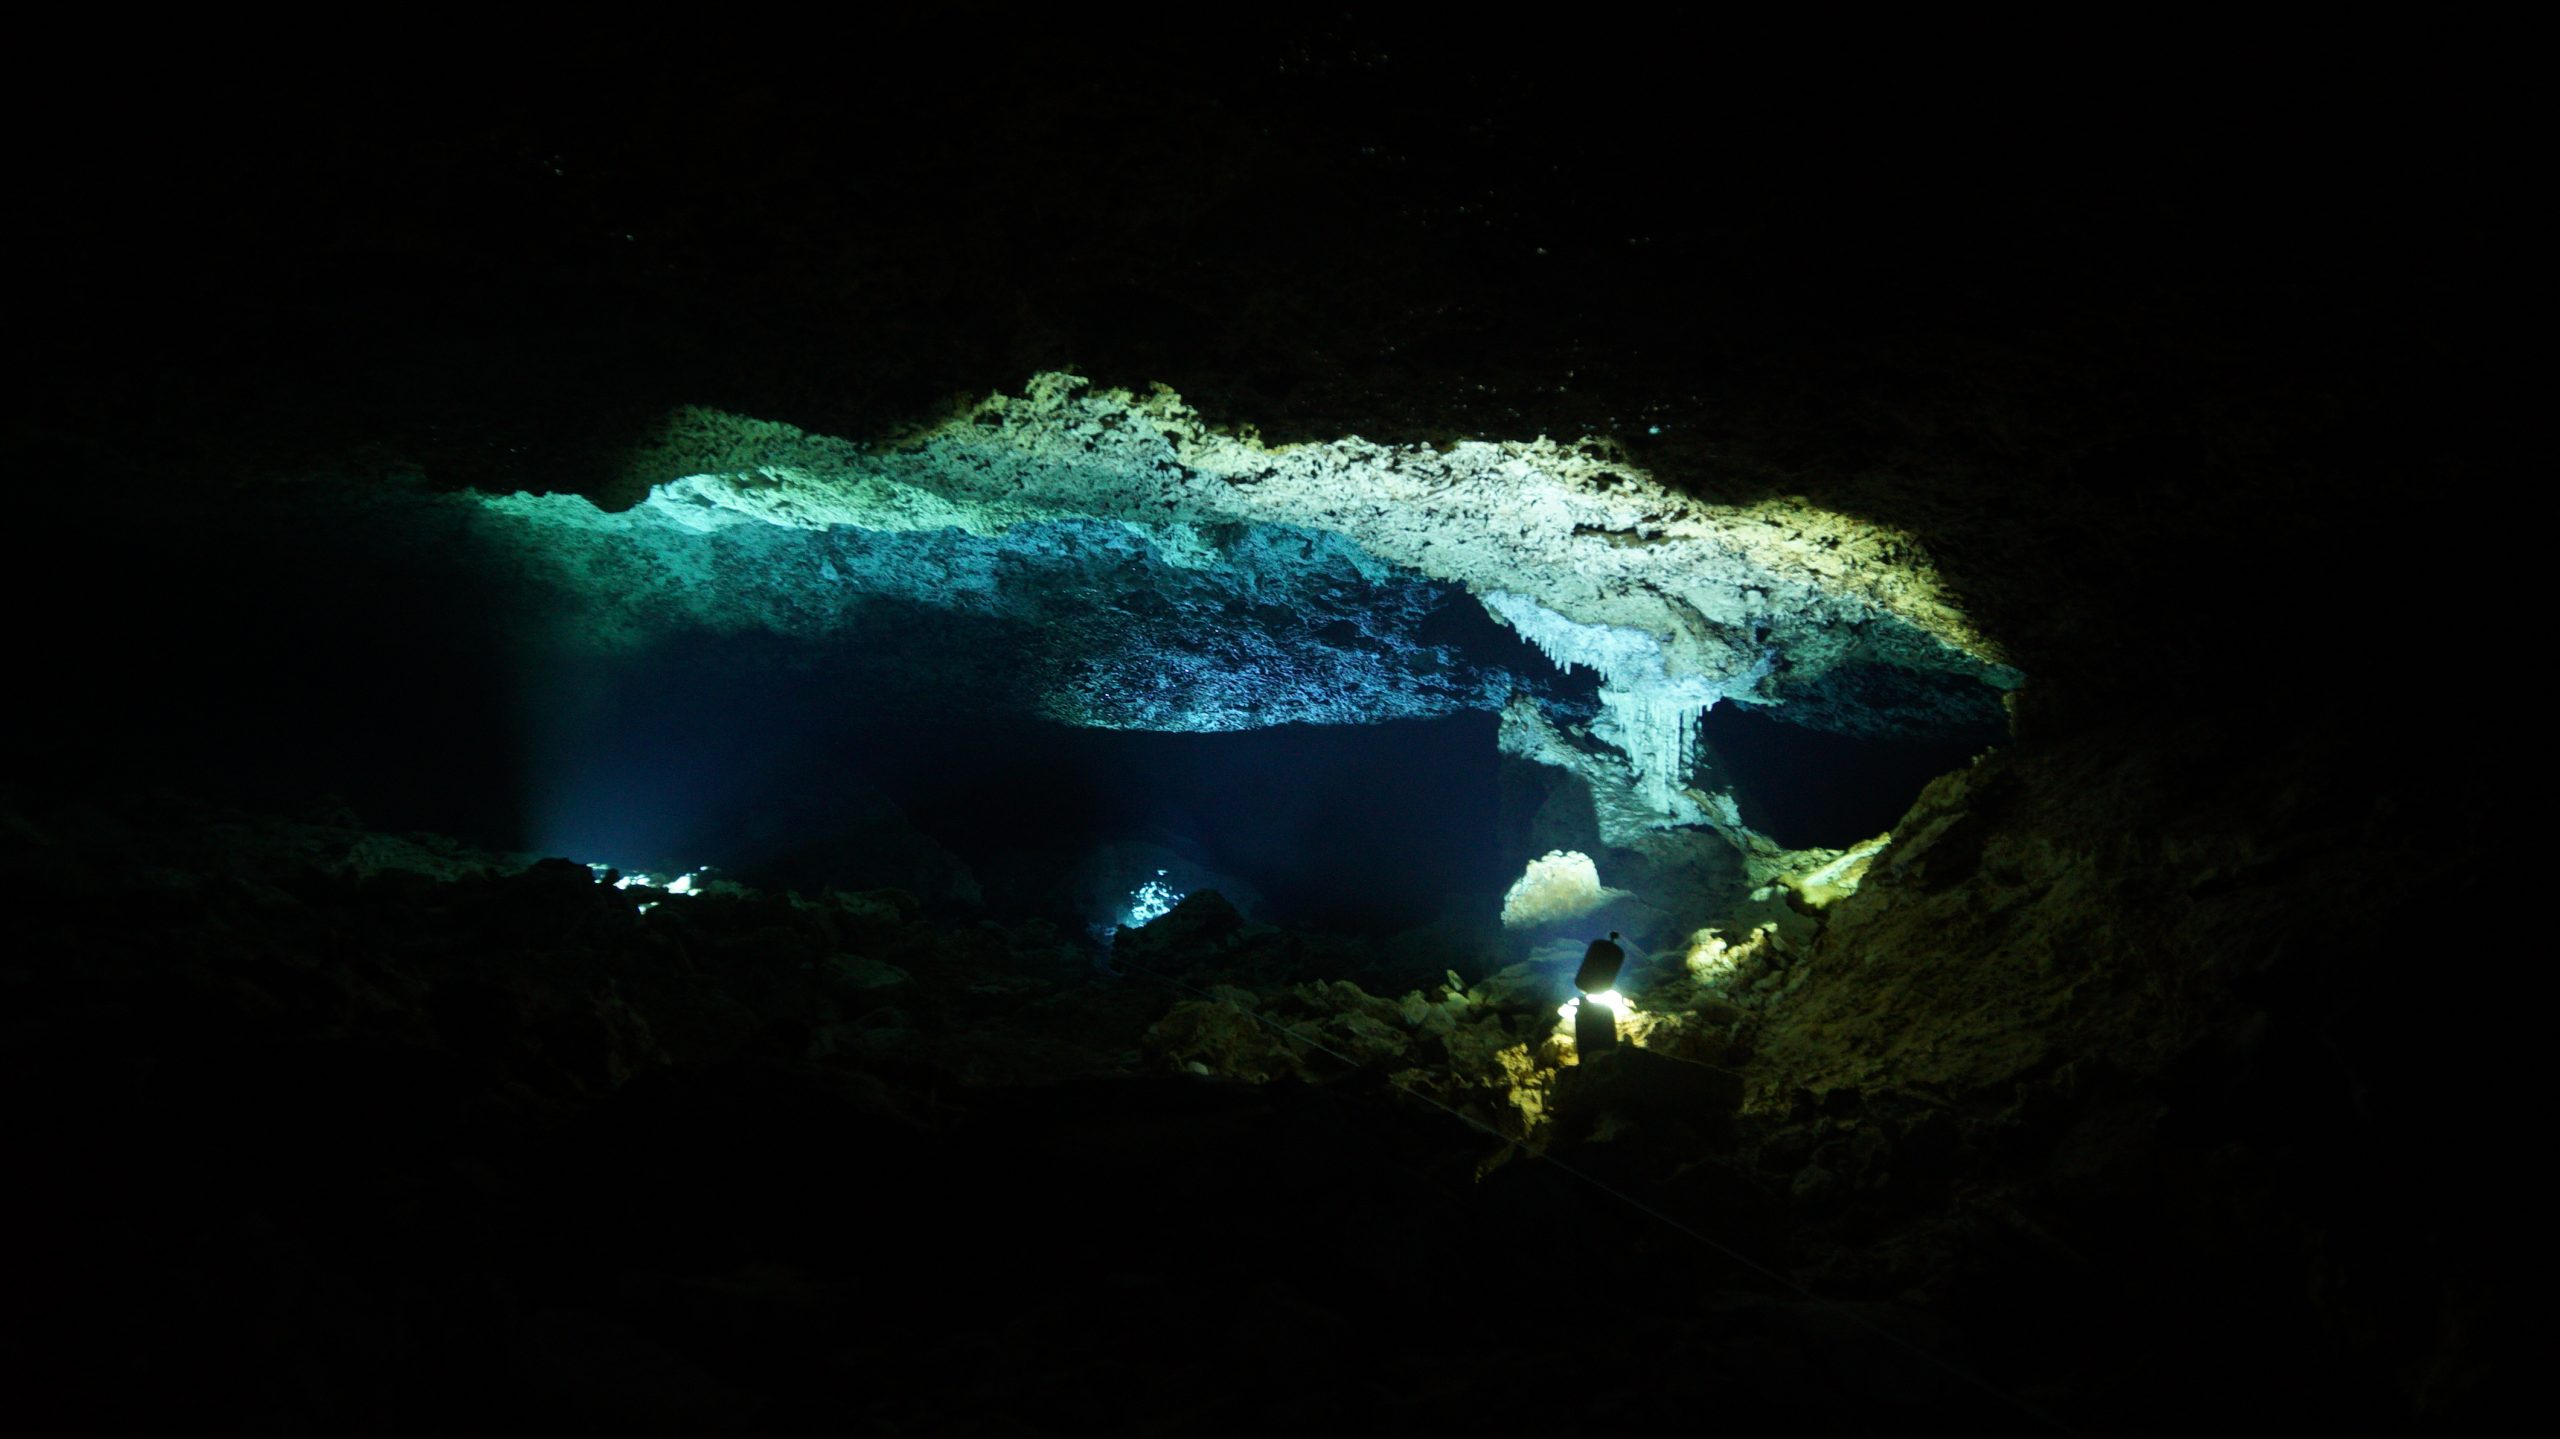 A shot of the flooded mining cave system called Sagitario